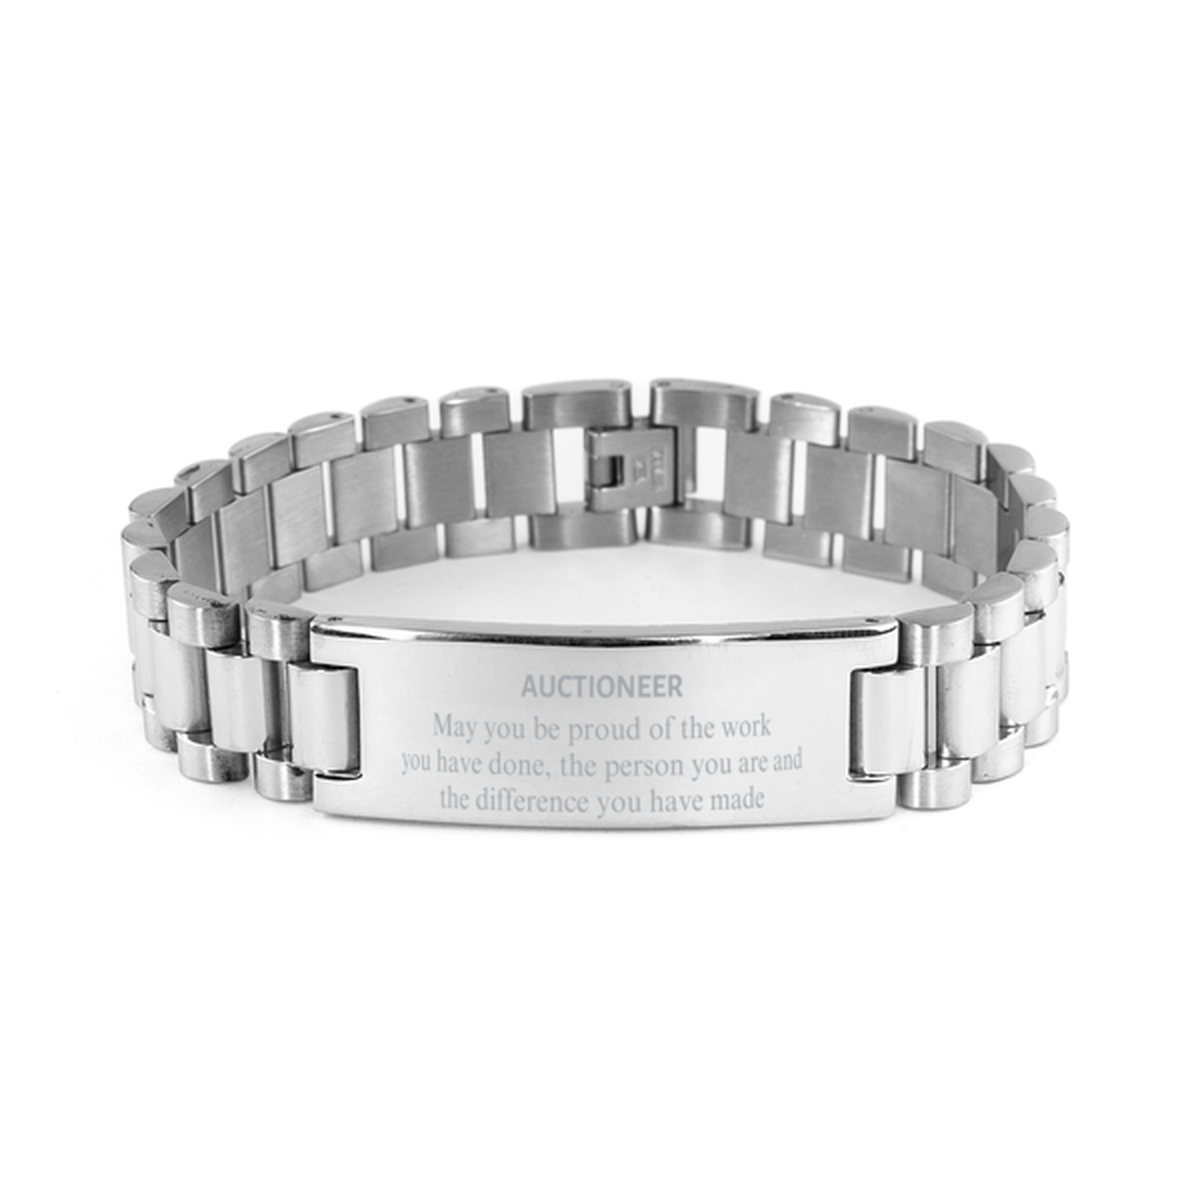 Auctioneer May you be proud of the work you have done, Retirement Auctioneer Ladder Stainless Steel Bracelet for Colleague Appreciation Gifts Amazing for Auctioneer